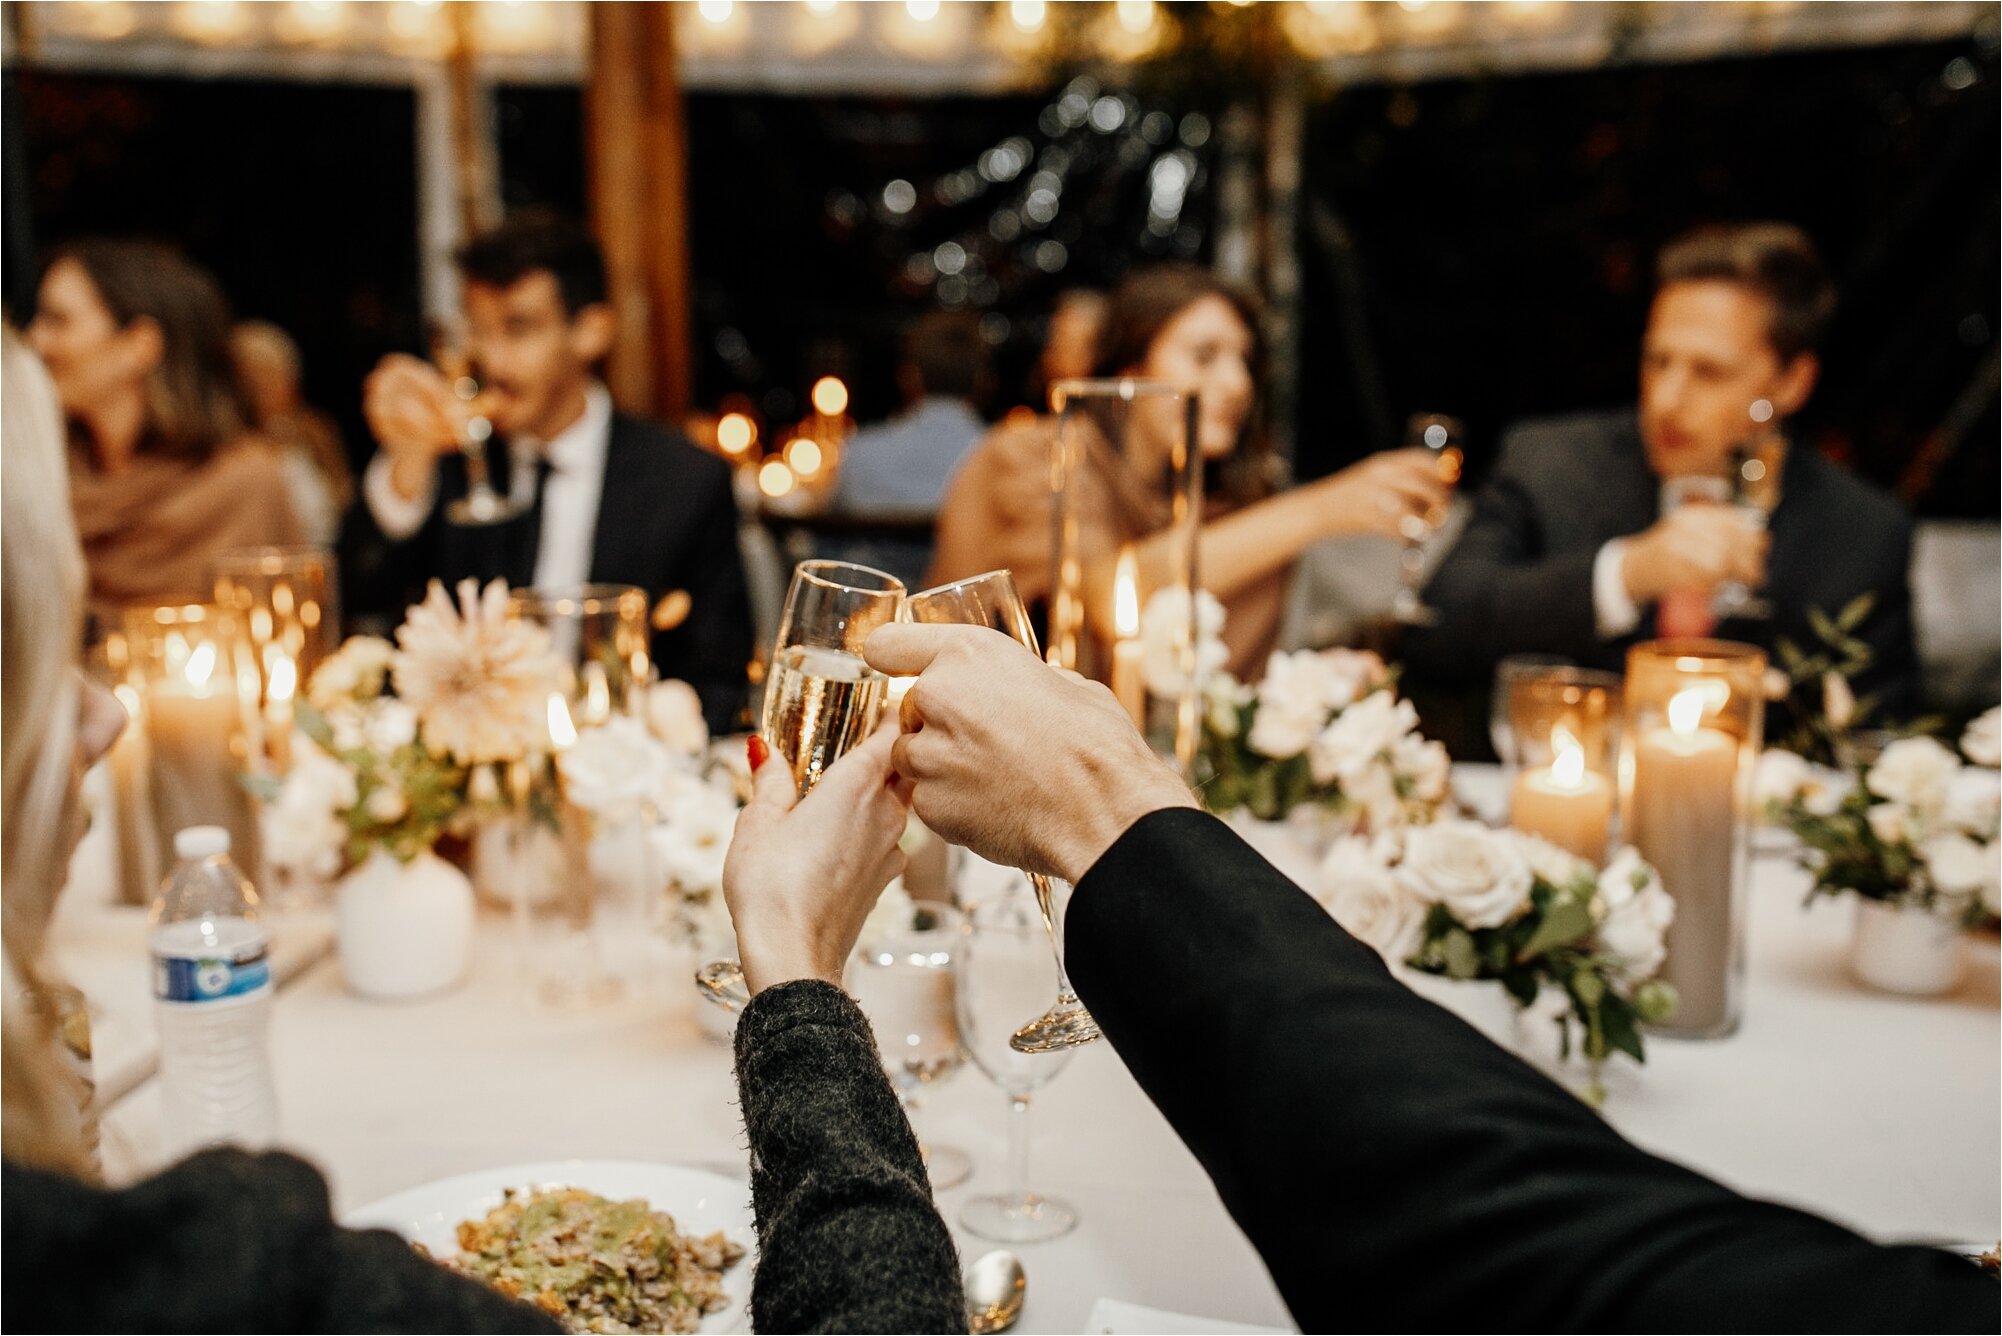  wedding guests clinking champagne glasses as toast to bride and groom on their wedding day 